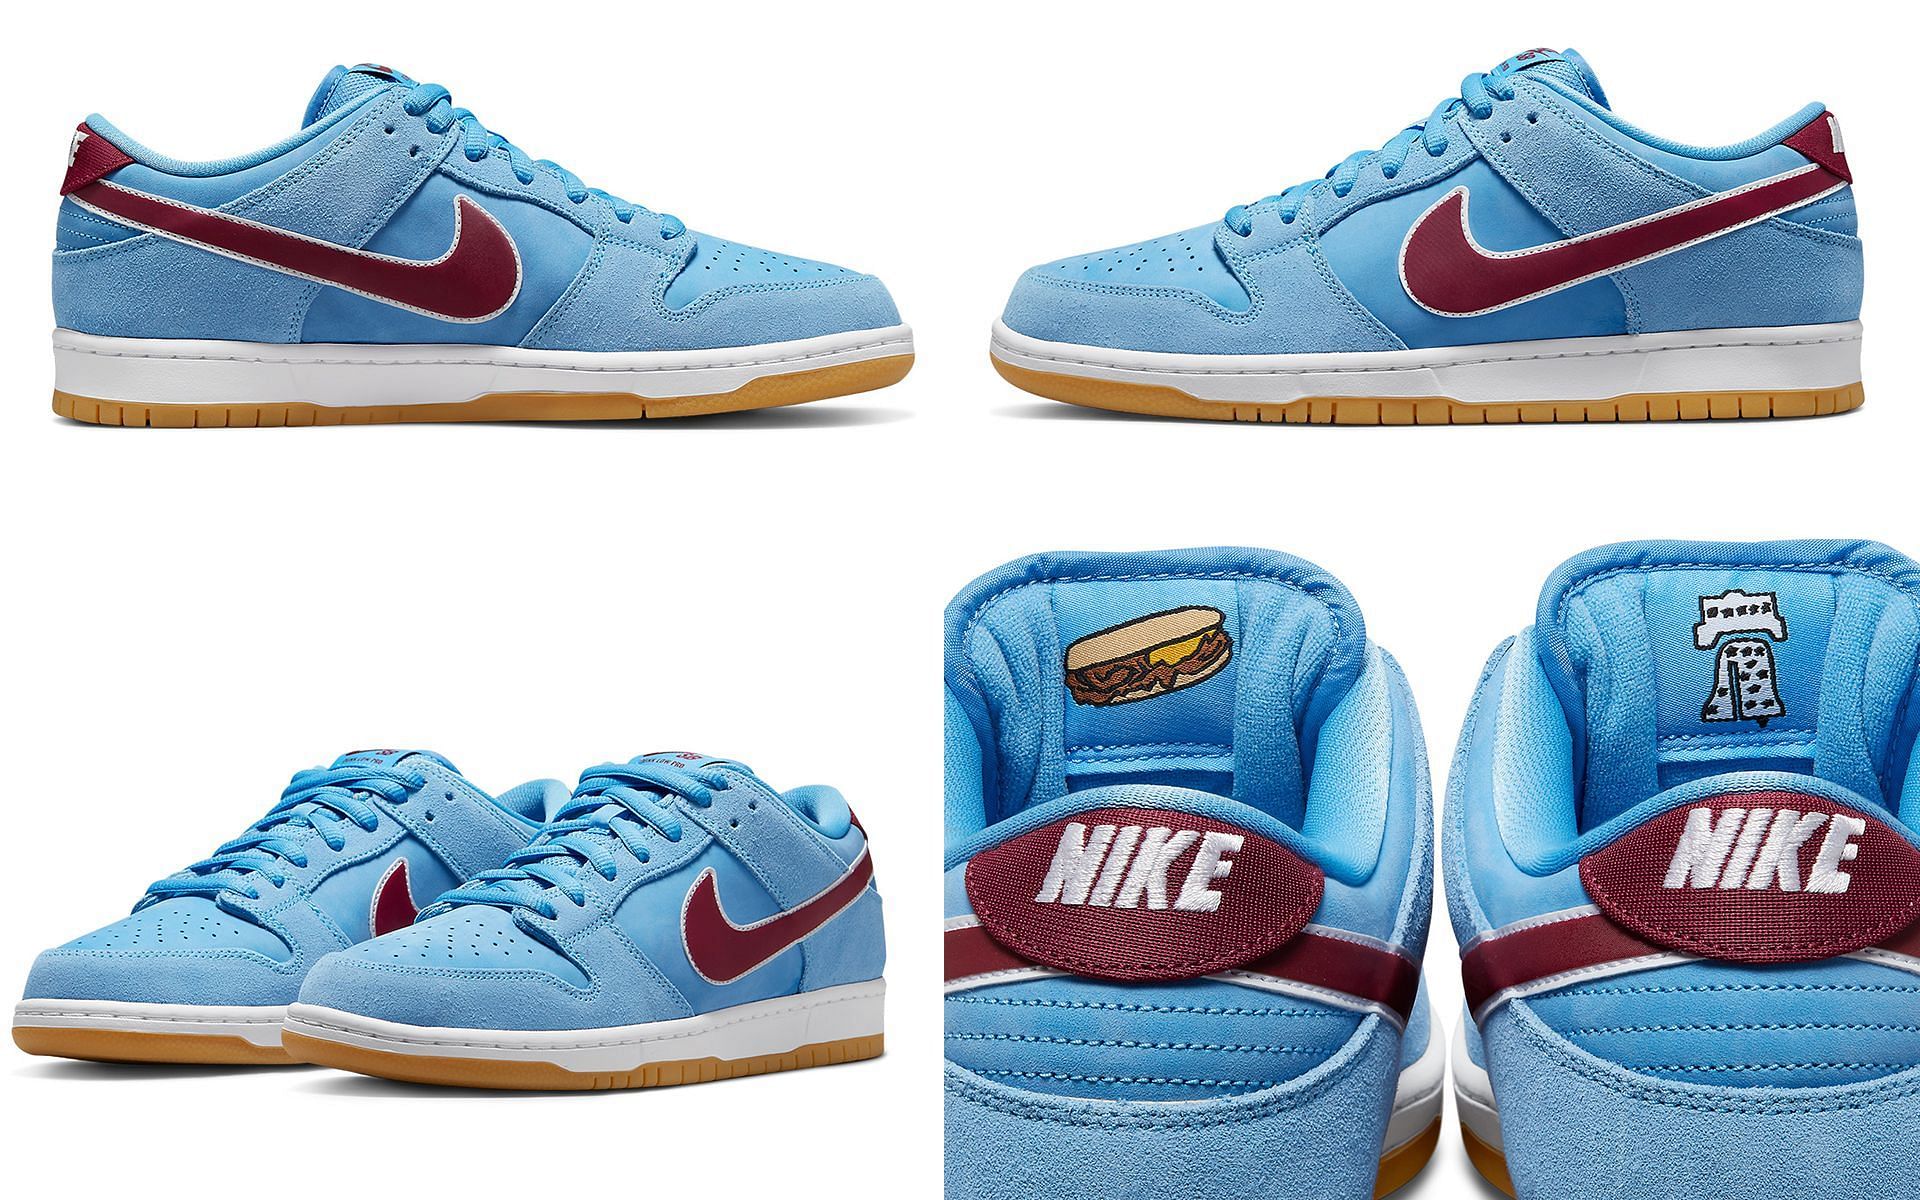 Nike SB Dunk Low Phillies Price and more about the MLBfriendly sneakers